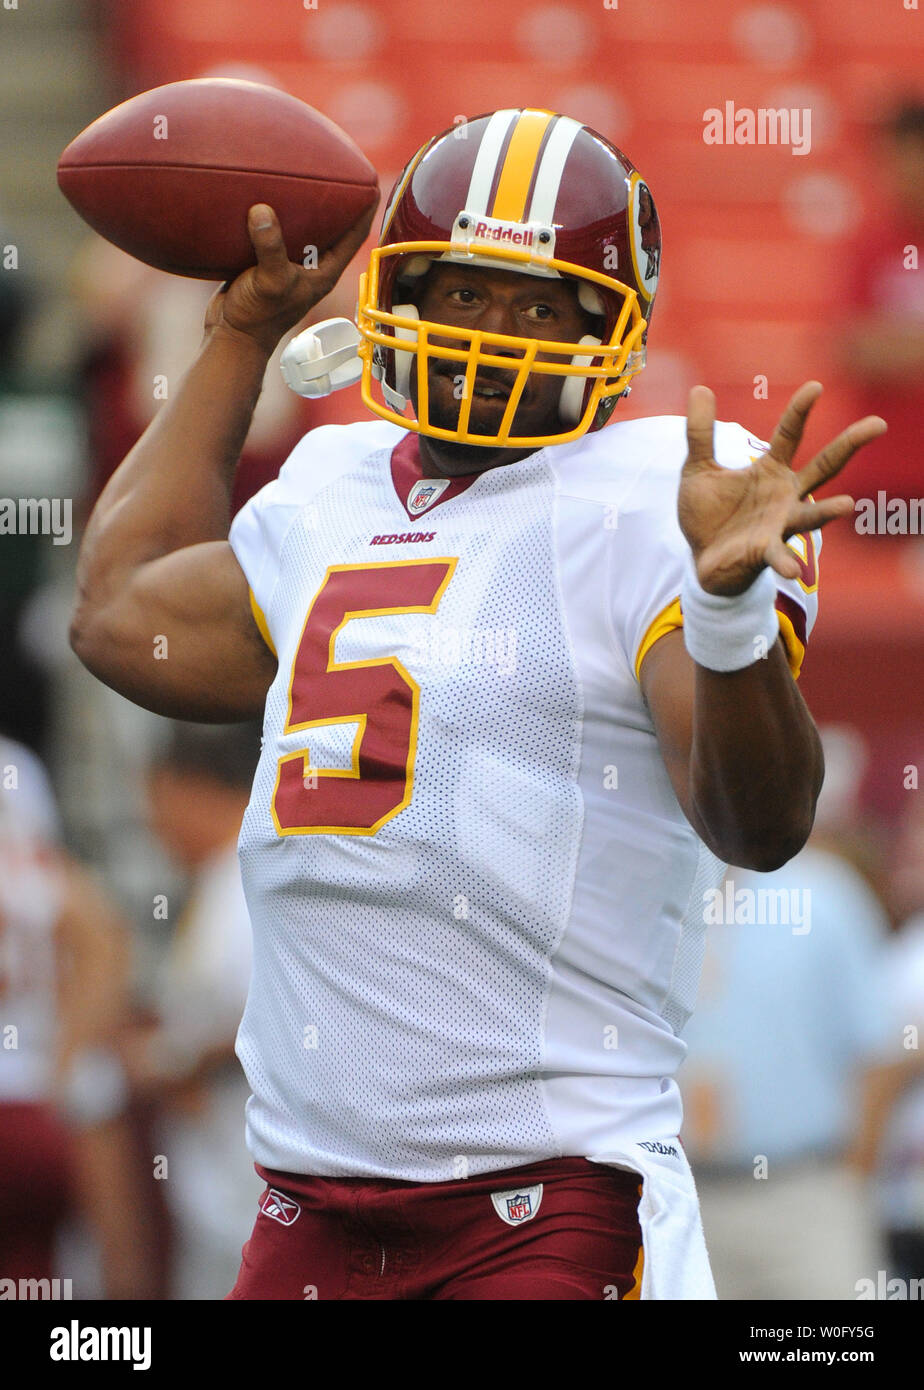 Washington Redskins' quarterback Donovan McNabb warms-up prior to the Redskins pre-season game against the Buffalo Bills at FedEx Field in Washington on August 13, 2010.   UPI/Kevin Dietsch Stock Photo